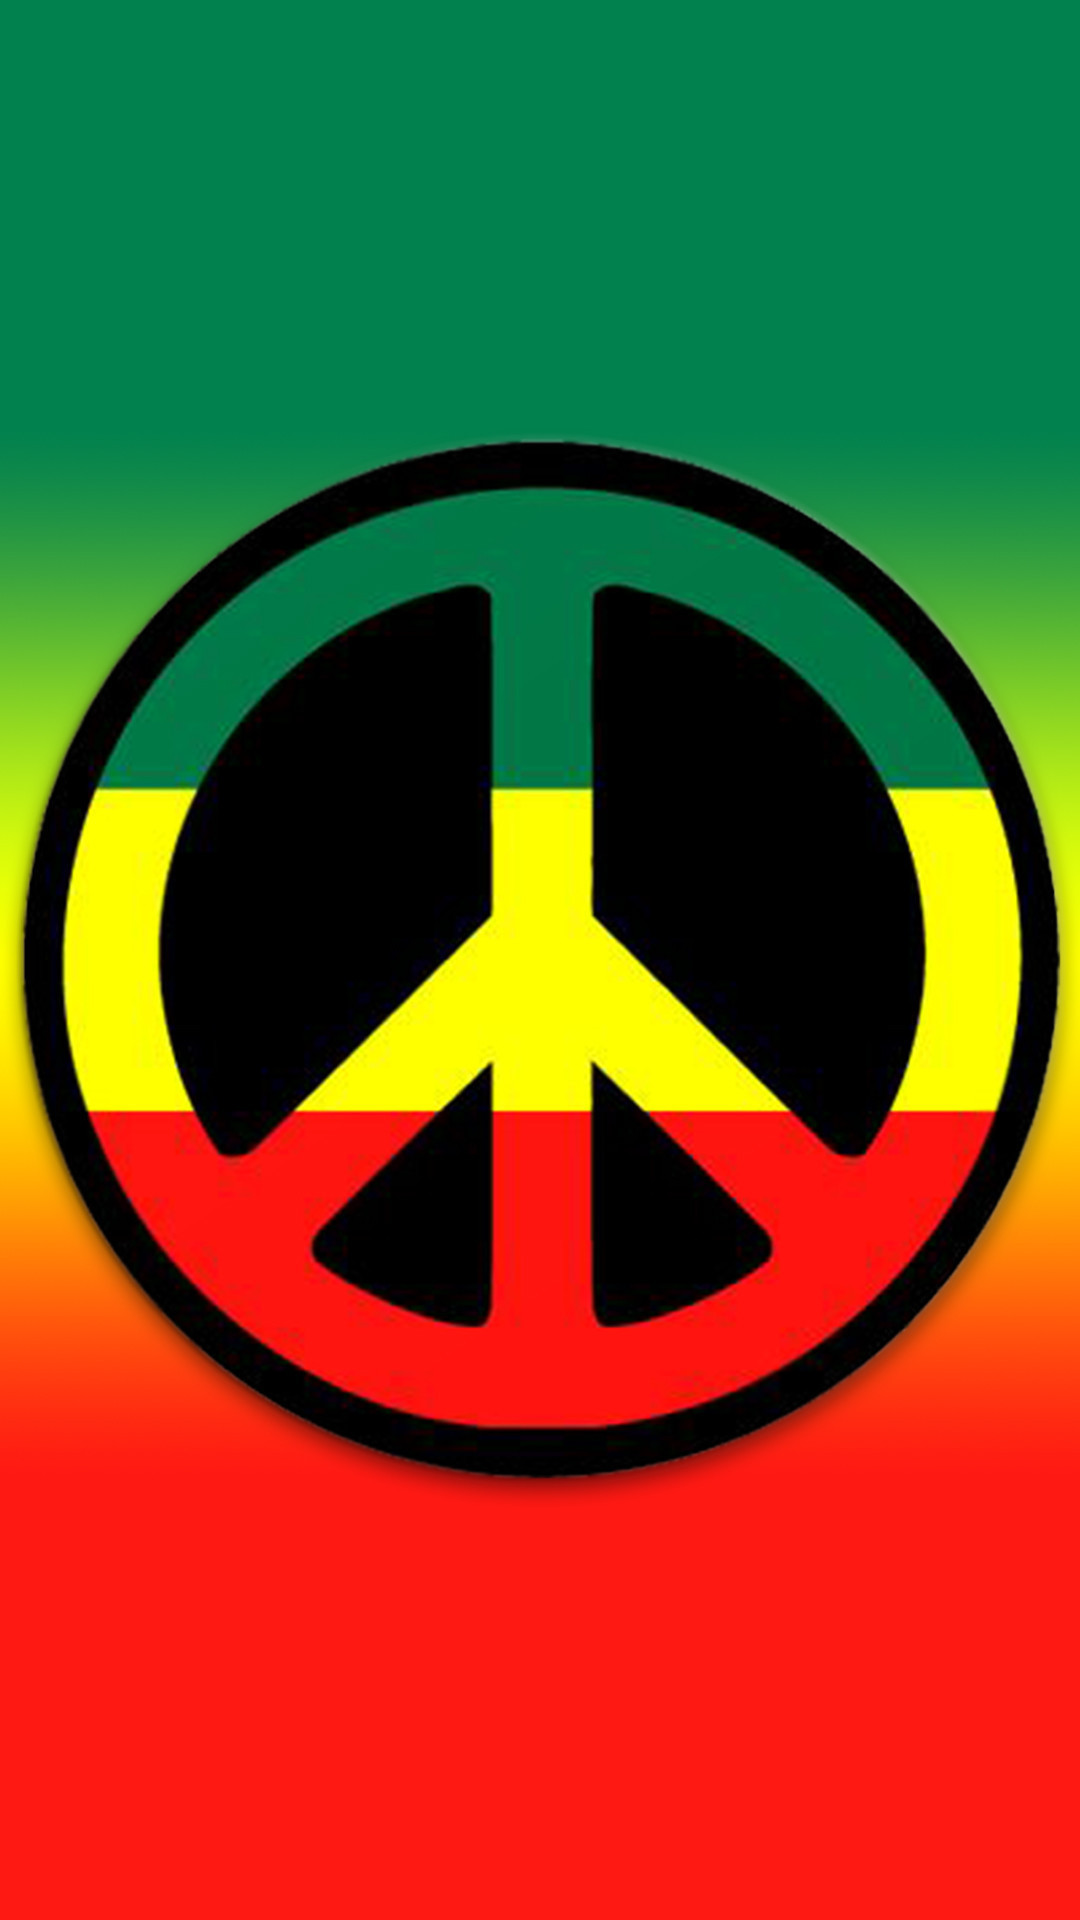 1080x1920 Peace Sign Wallpaper for android New Peace Logo Wallpapers Â·â 